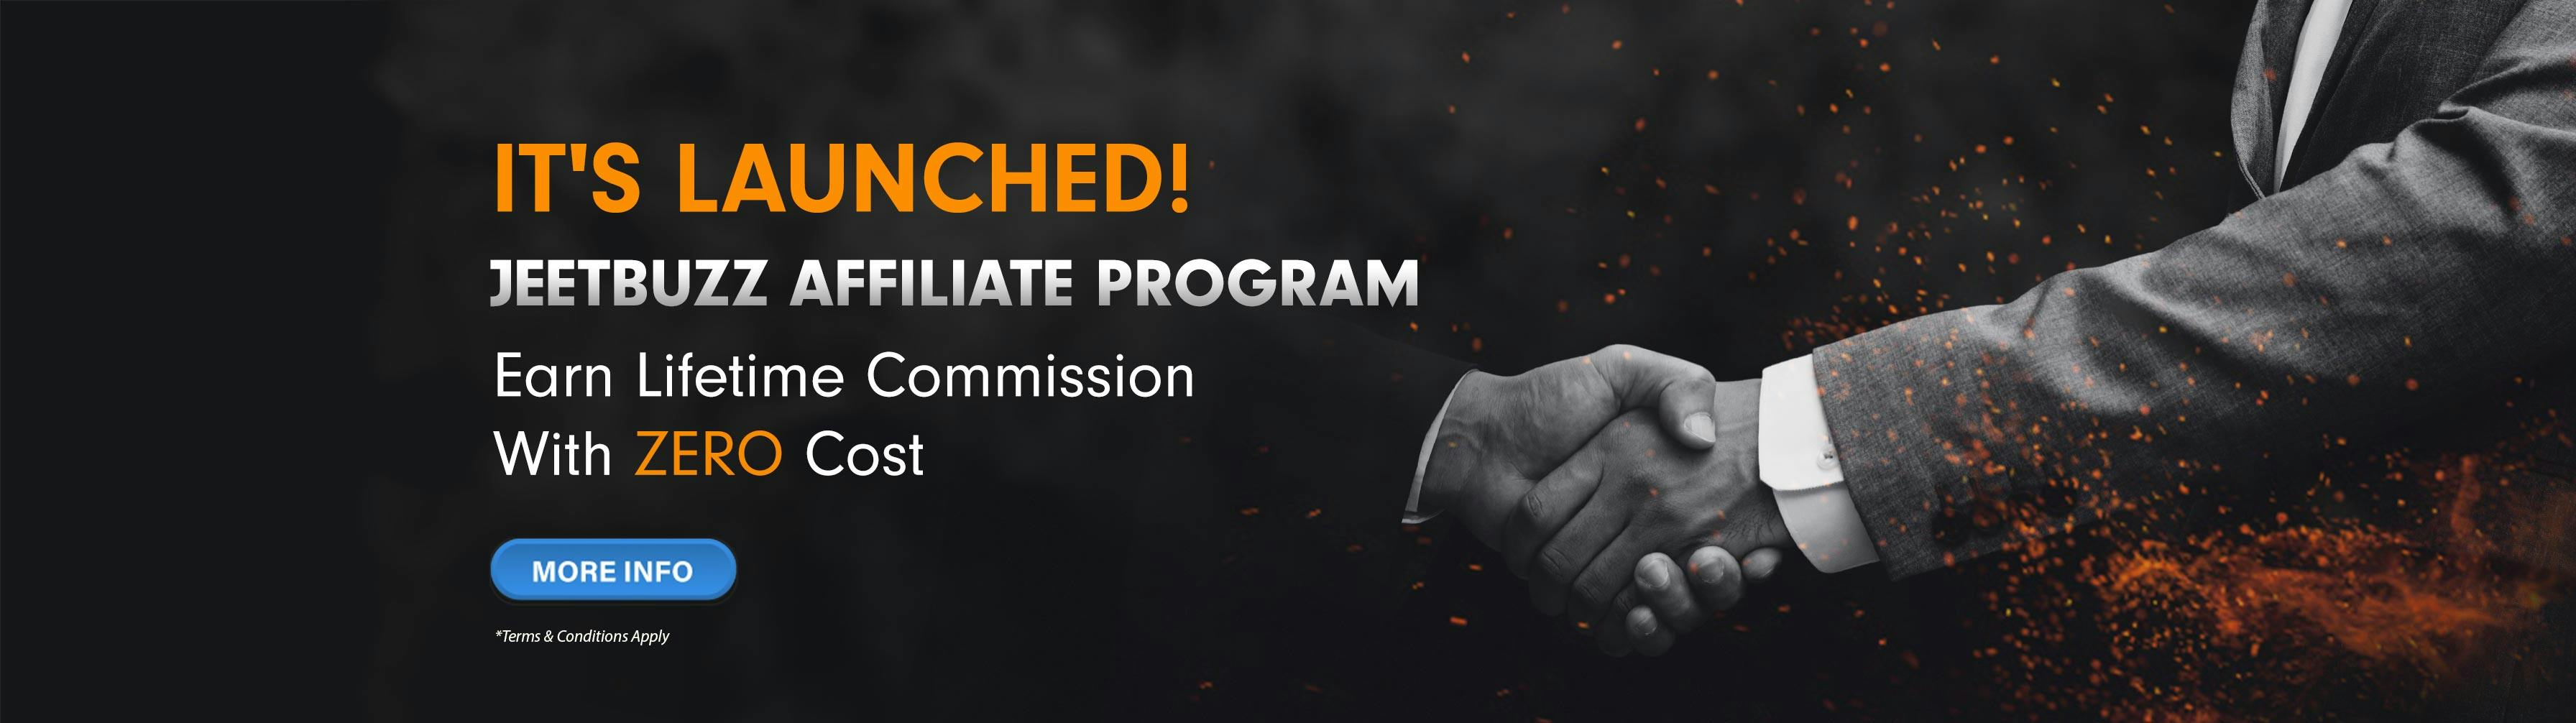 It's Launched! Jeetbuzz Affiliate Program